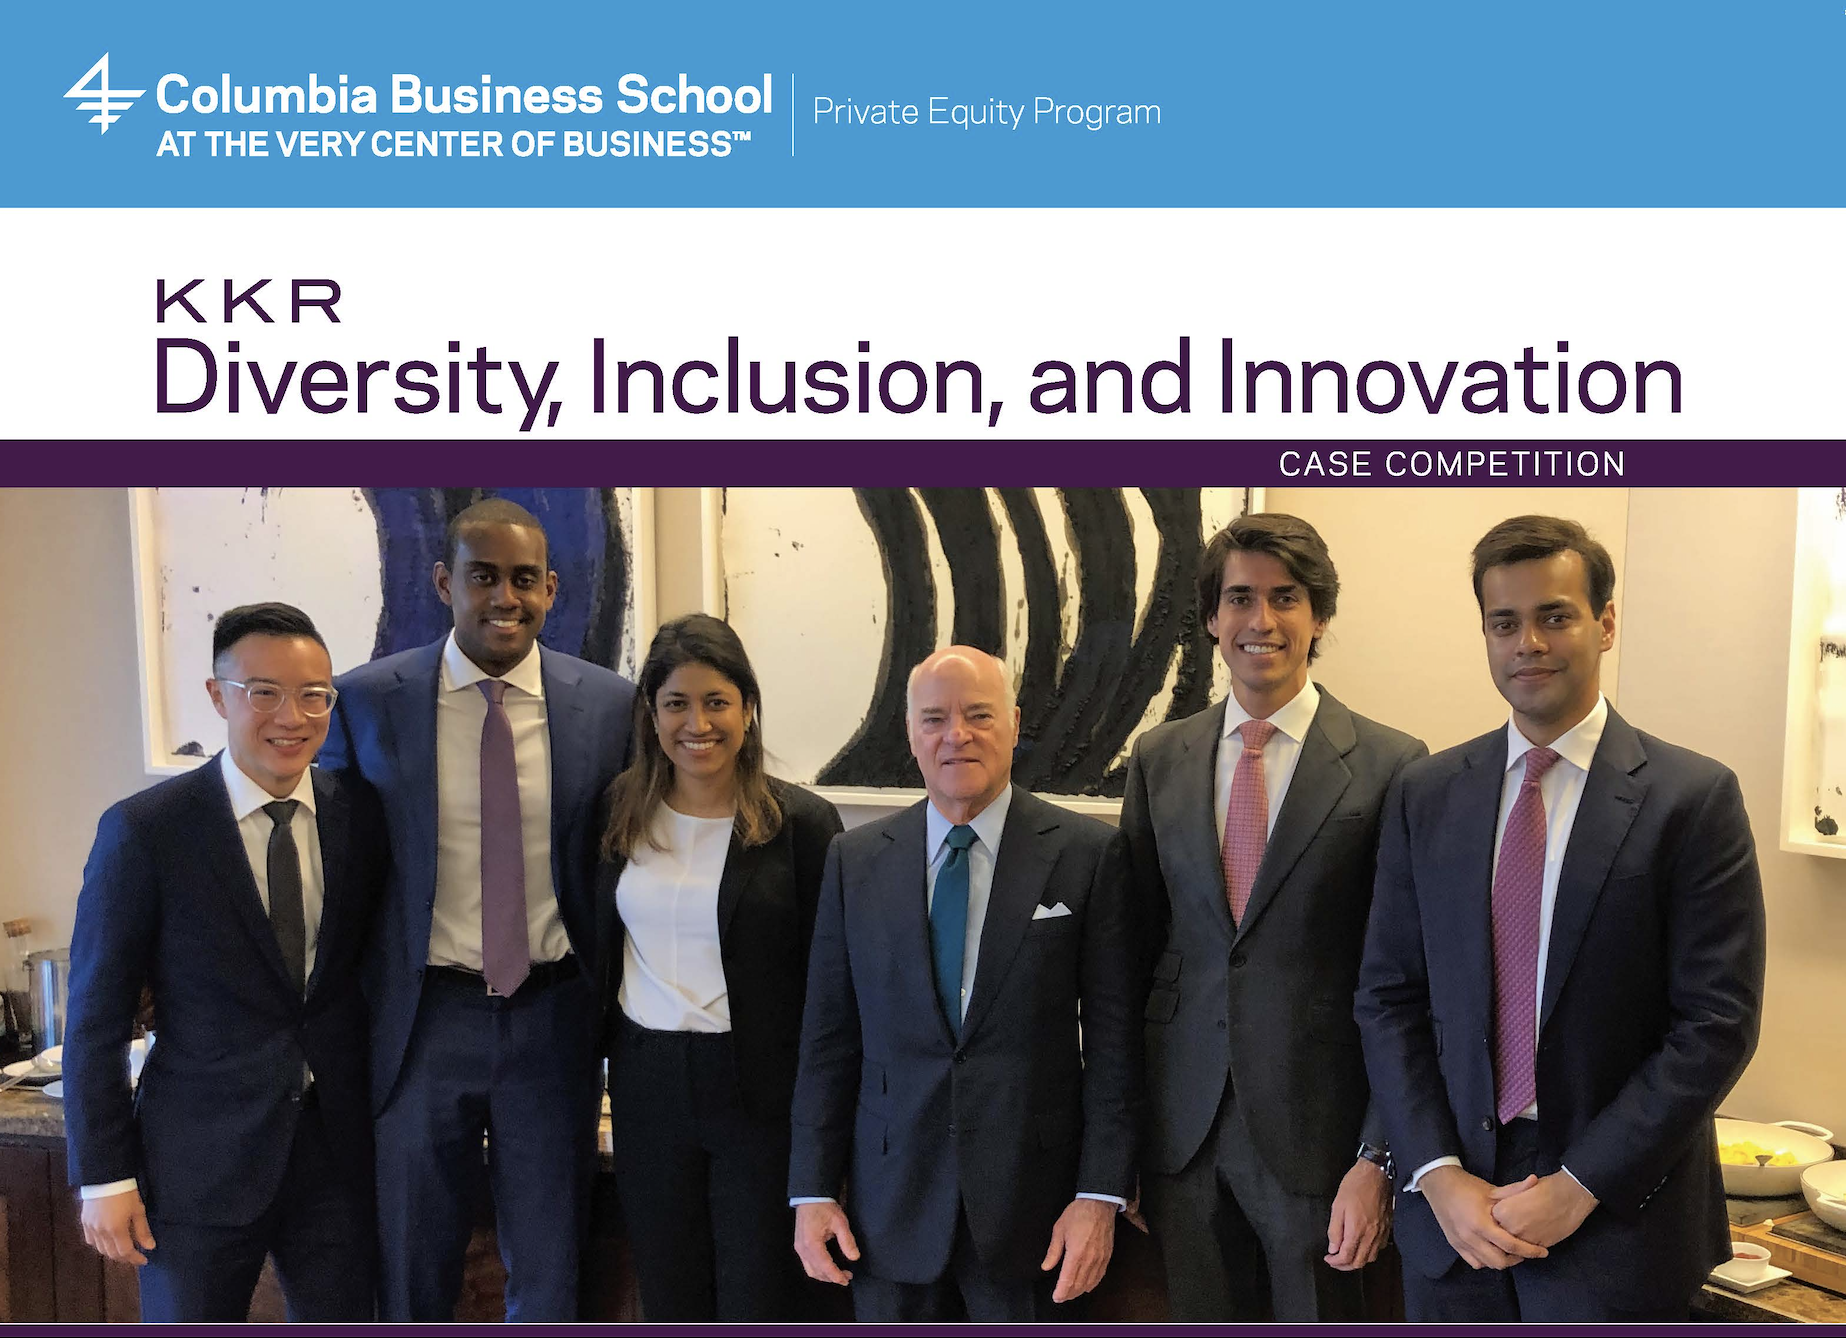 KKR Diversity, Inclusion, and Innovation Case Competition flyer: photo of some participants